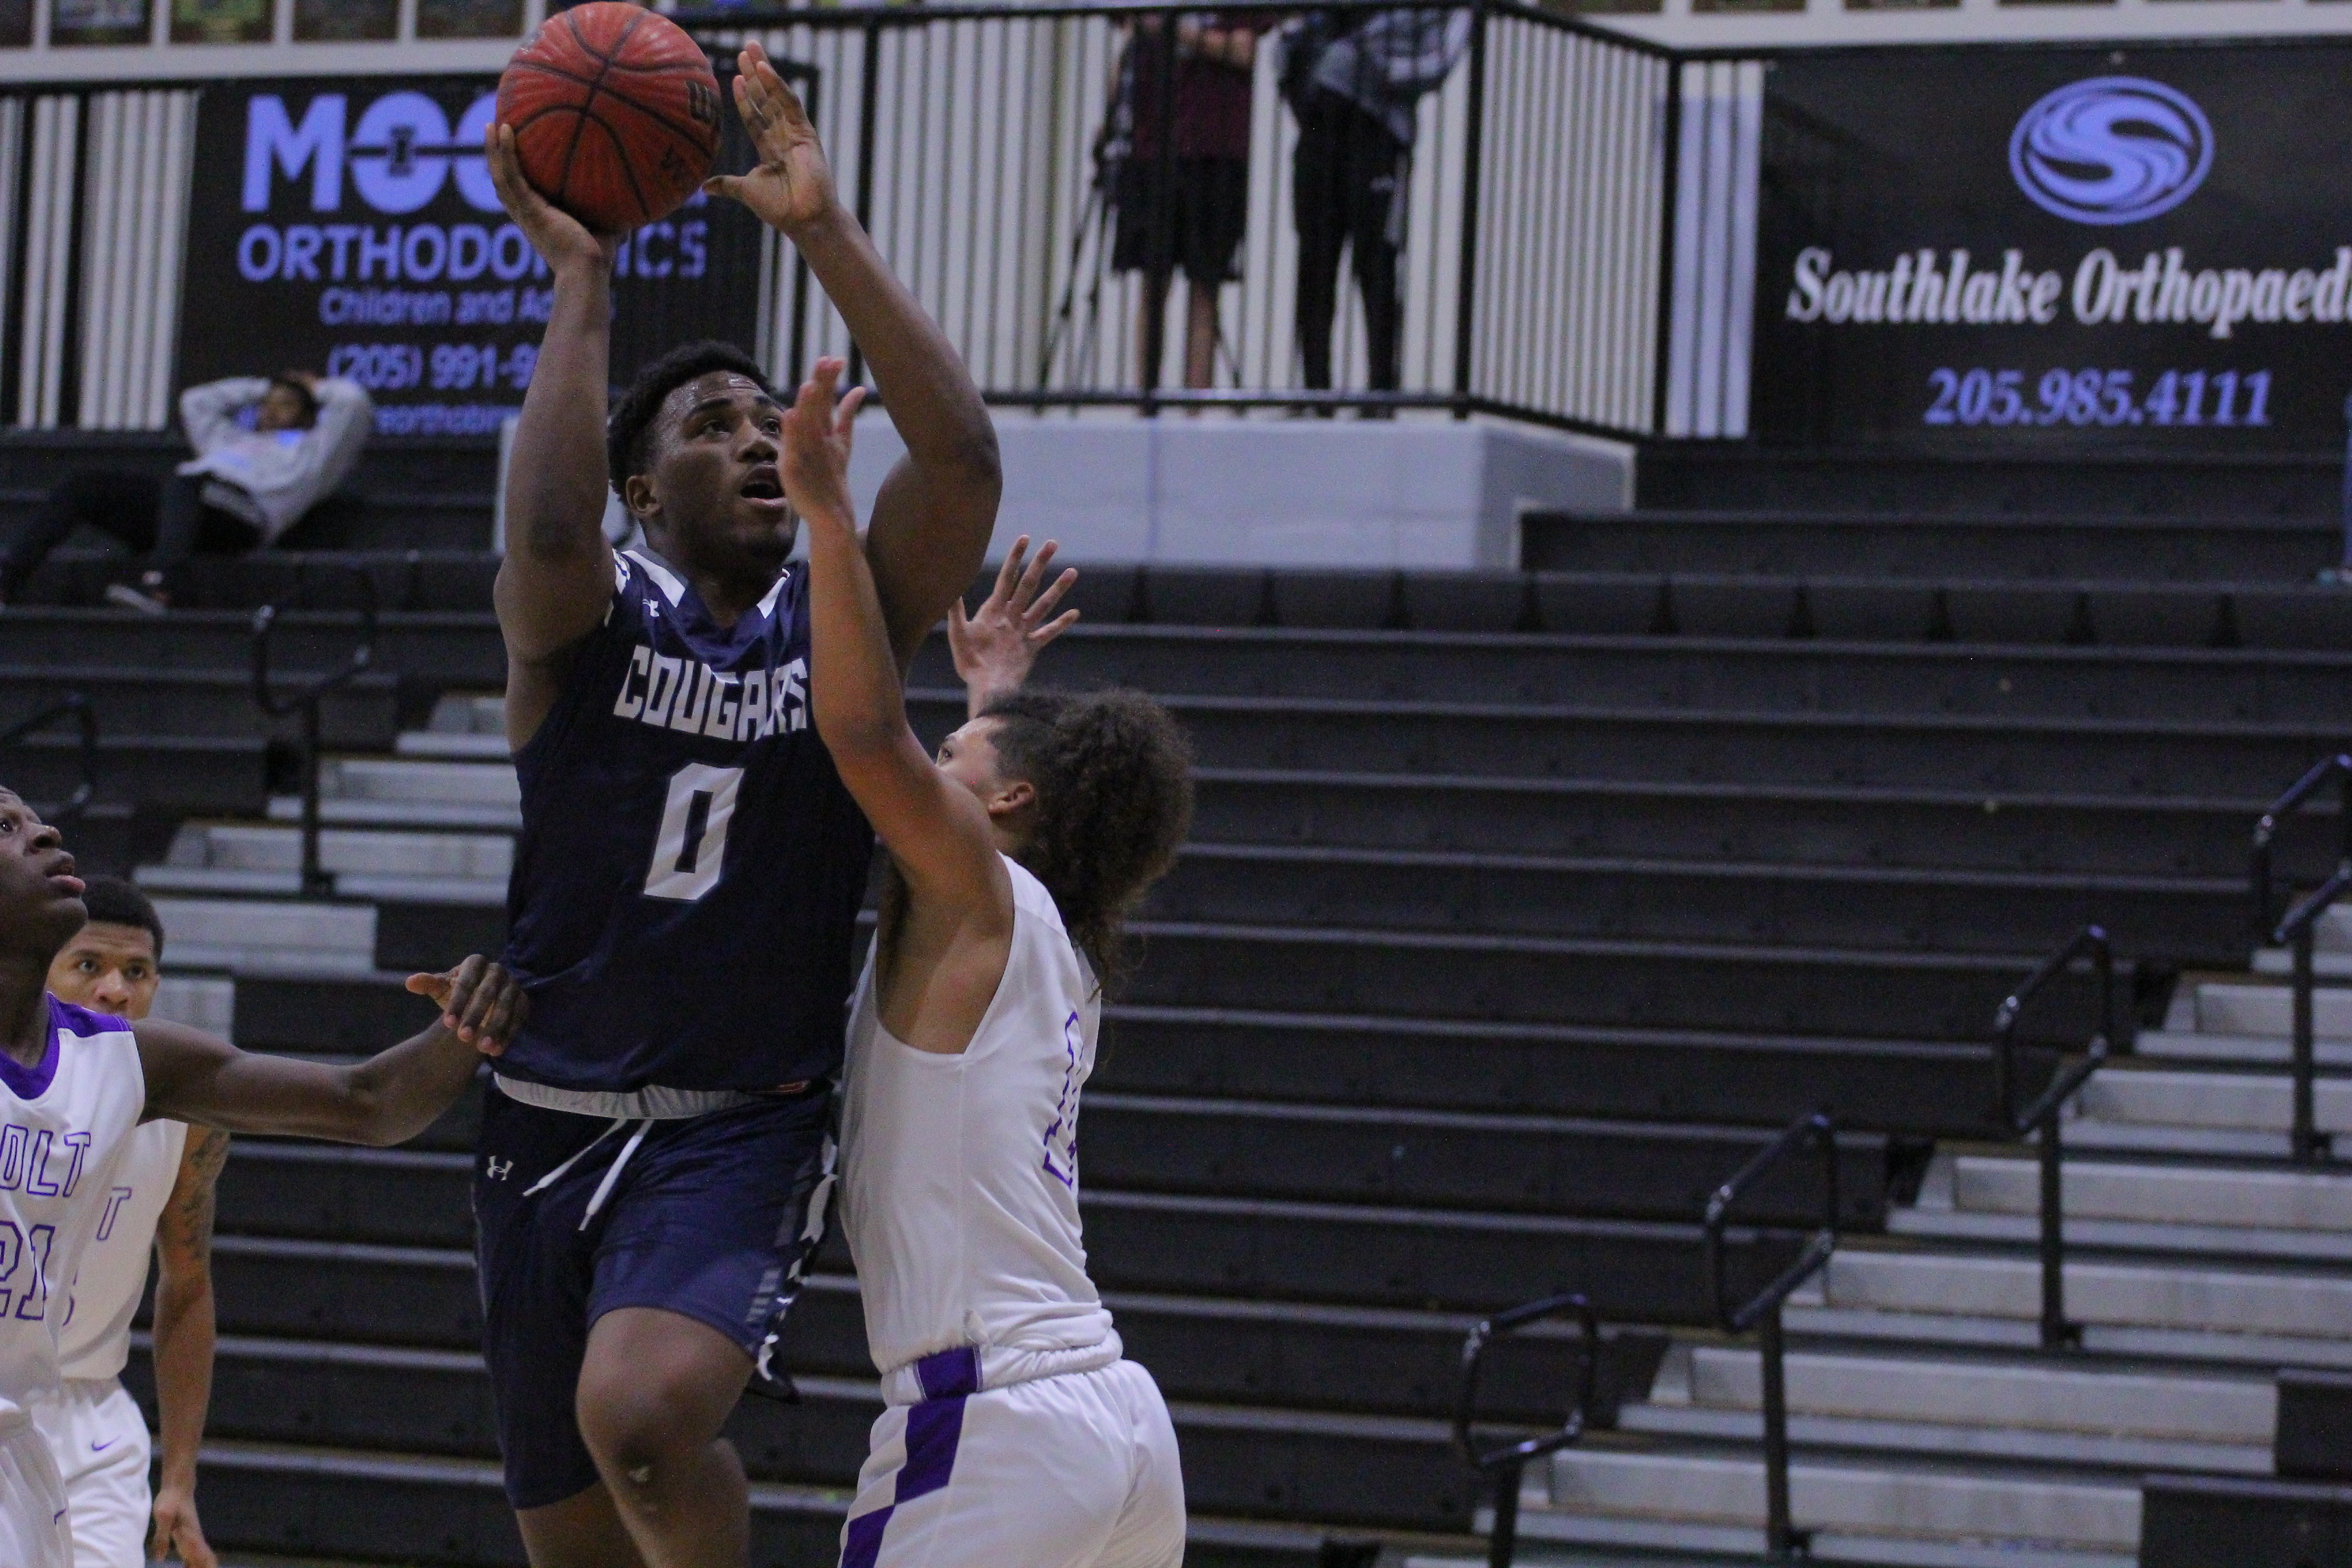 Clay-Chalkville's Jaden Johnson named to 2019 Jag Classic All-Tournament team